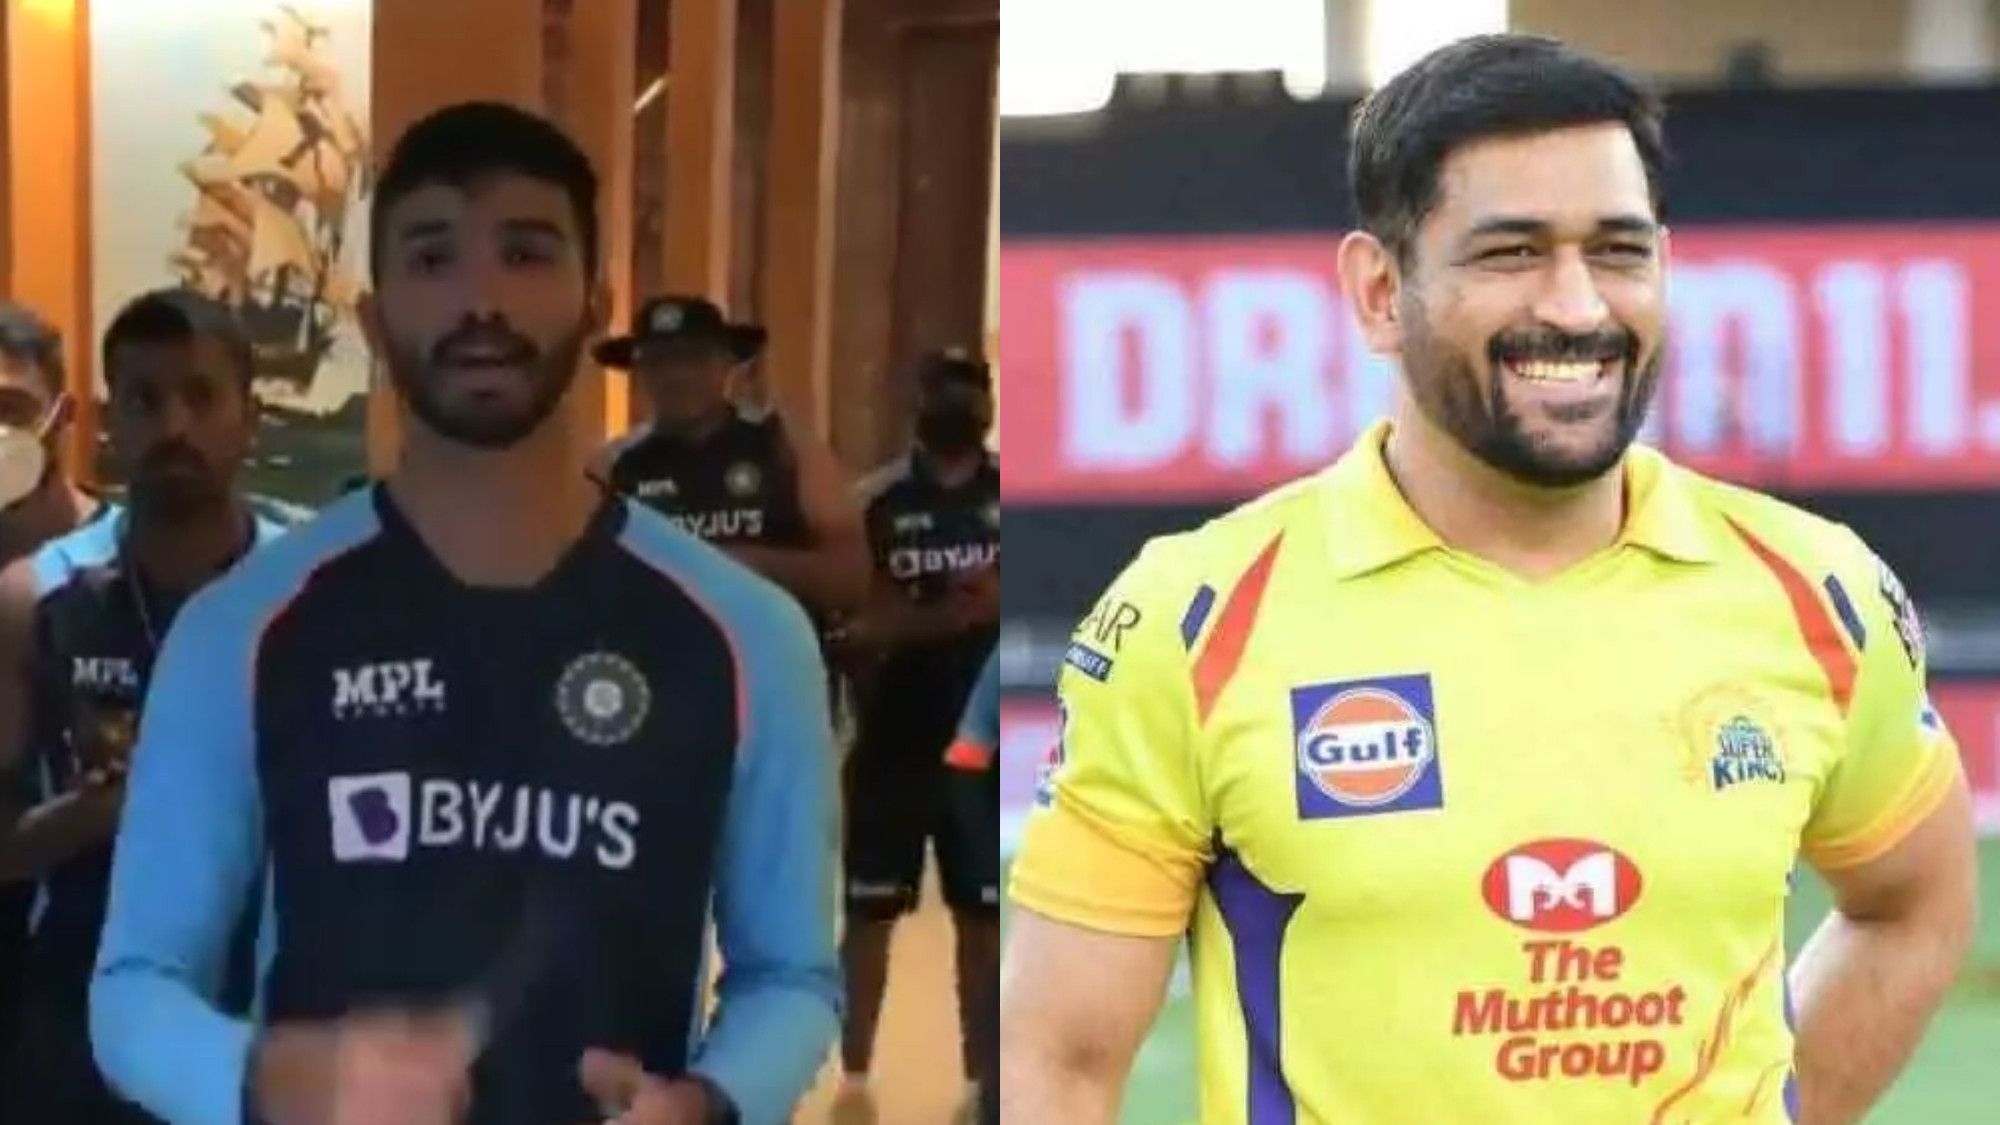 WATCH- Devdutt Padikkal wishes MS Dhoni before cutting cake as Team India celebrates his birthday